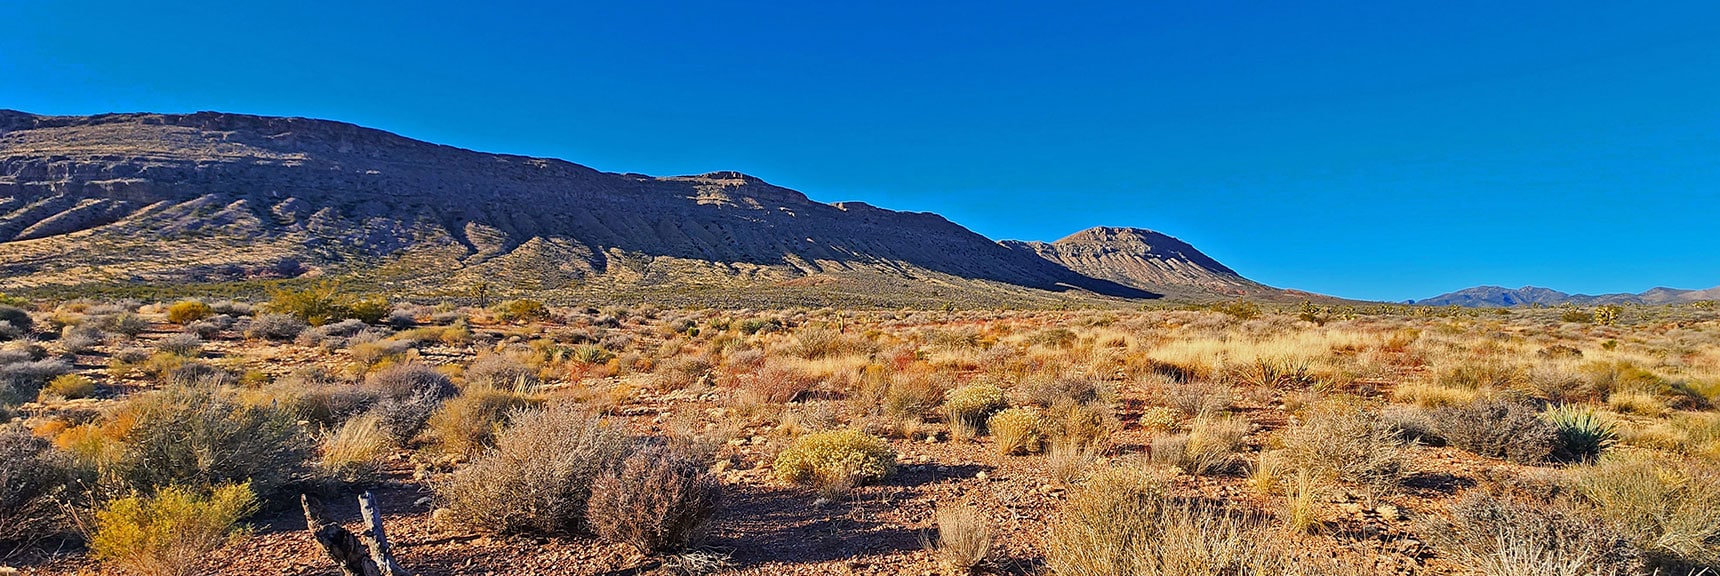 Long View of Bluff's East Side. Start Point is at Far End. | Landmark Bluff Circuit | Lovell Canyon, Nevada